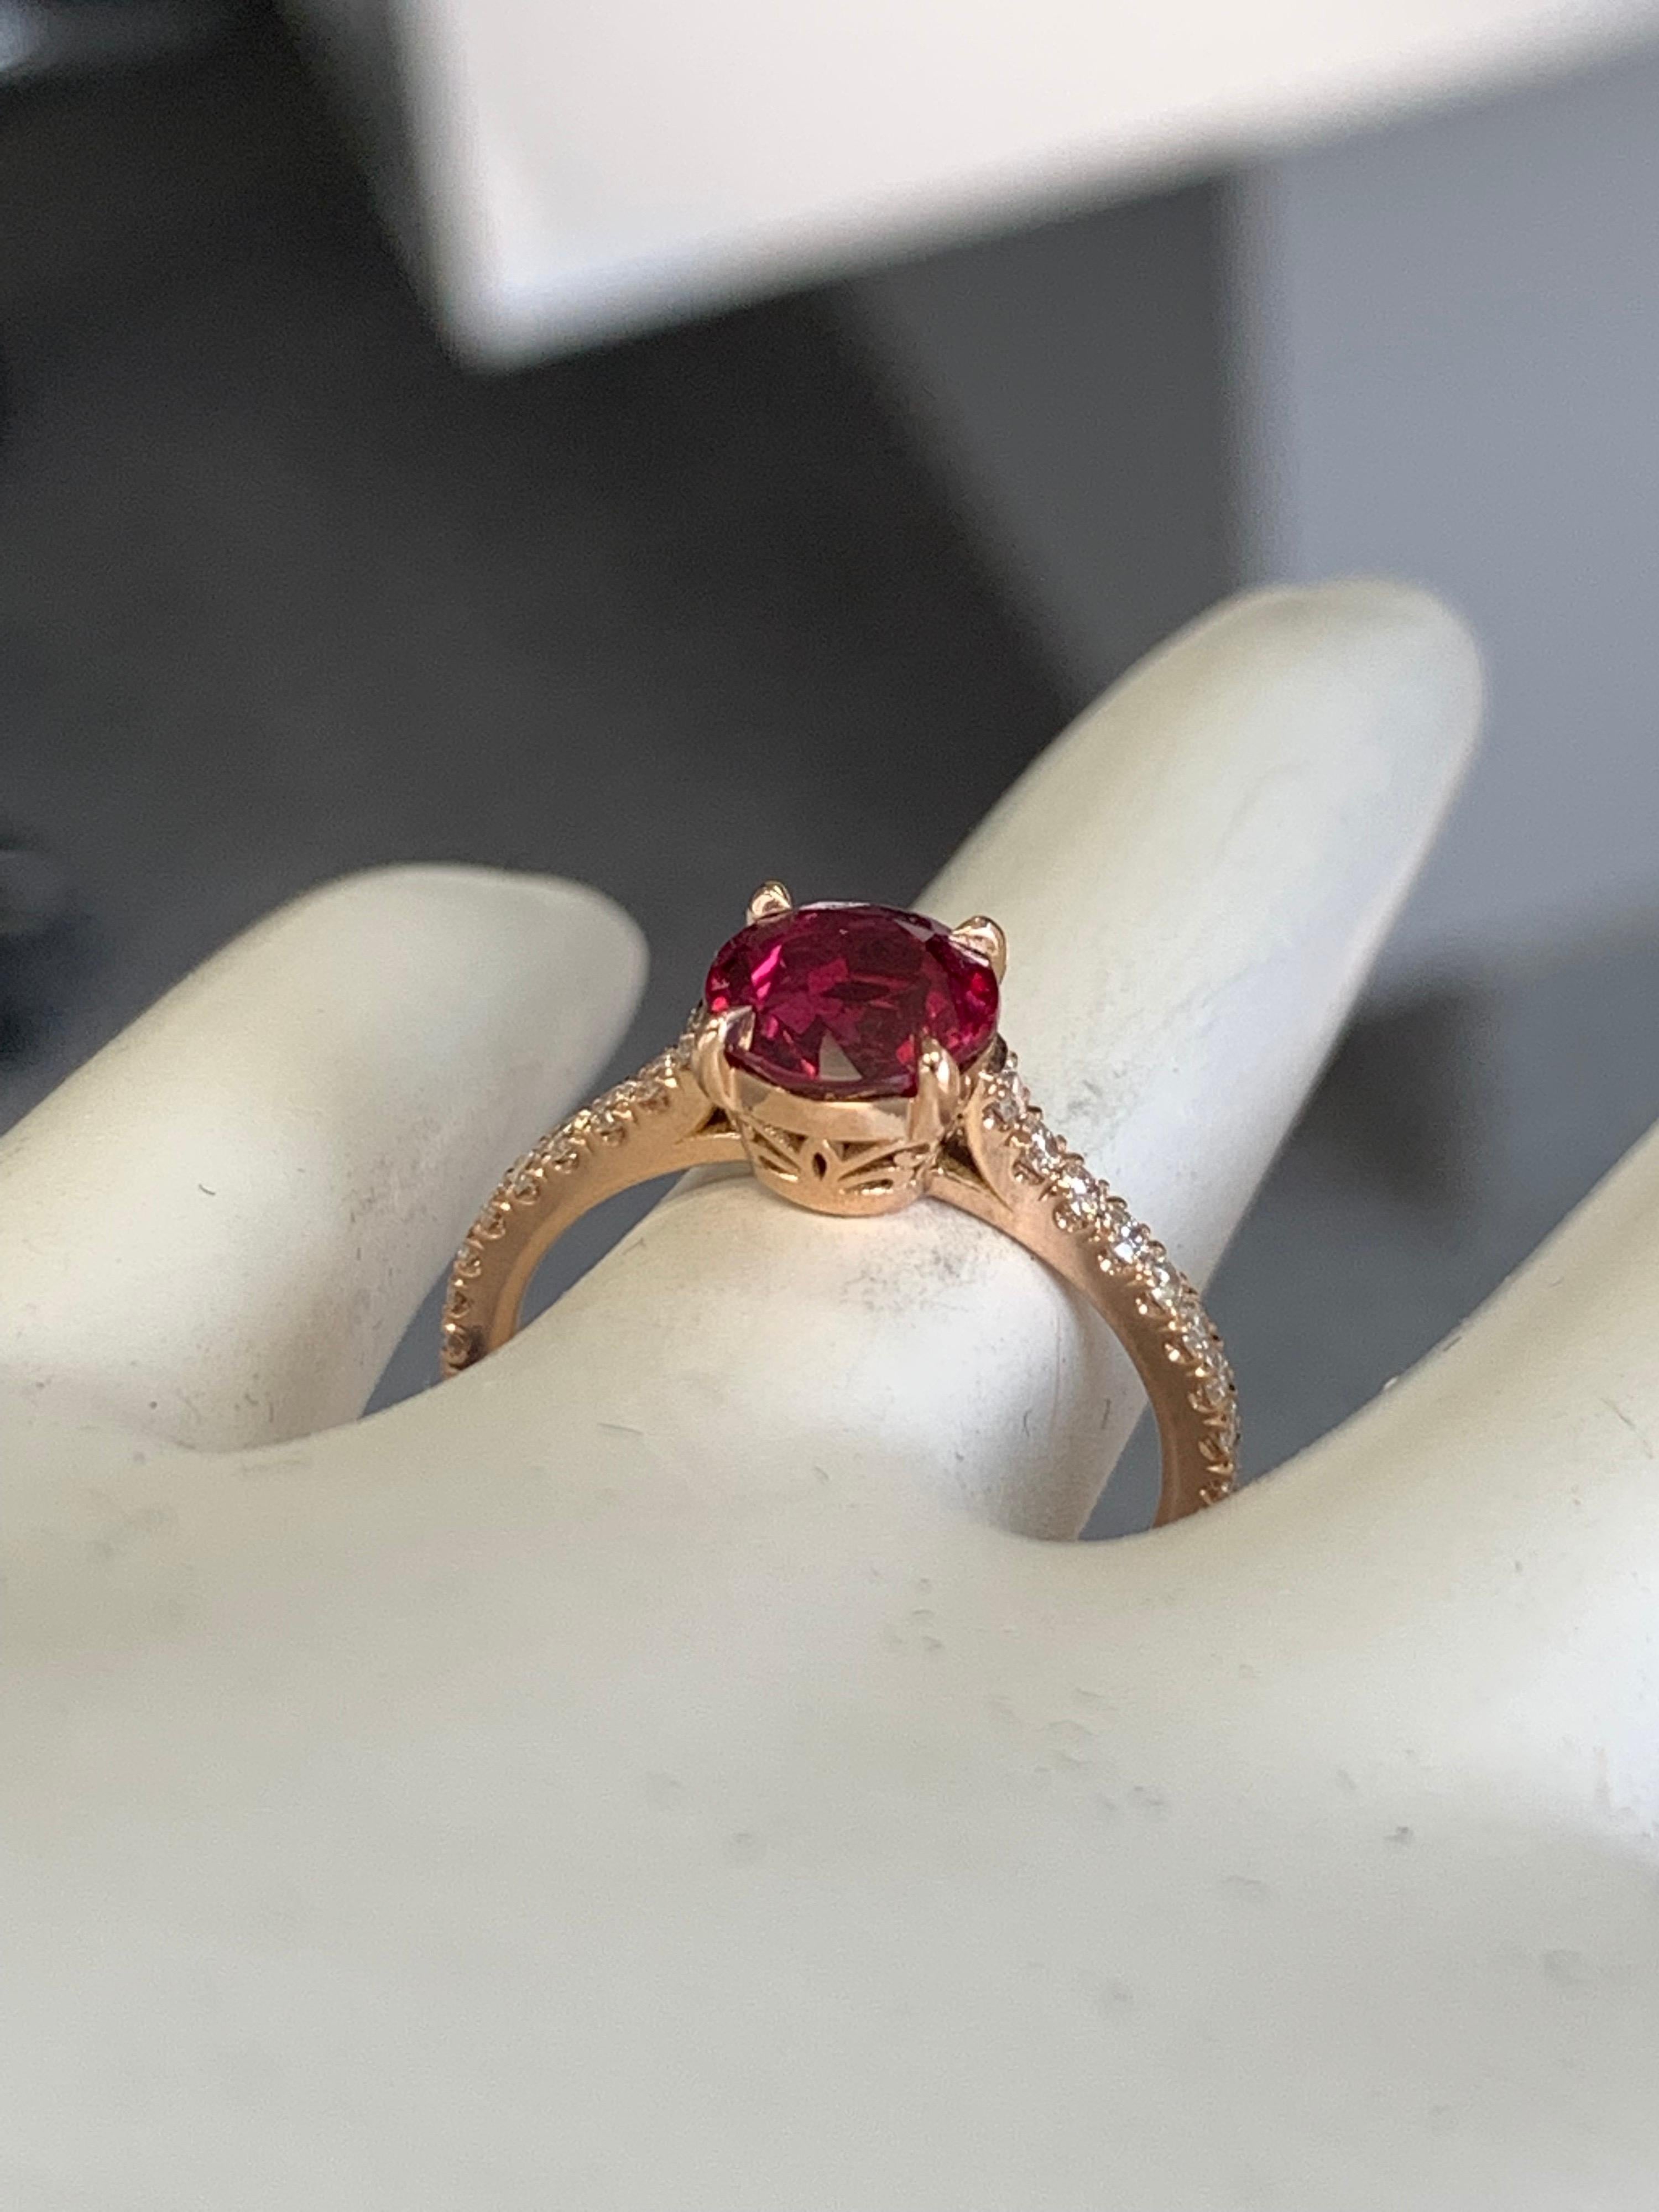 Ladies 18K Rose Gold Natural Ruby and Diamond Ring (Size 5.75).

The GIA certified Ruby weighs 1.68 carats and the color is 